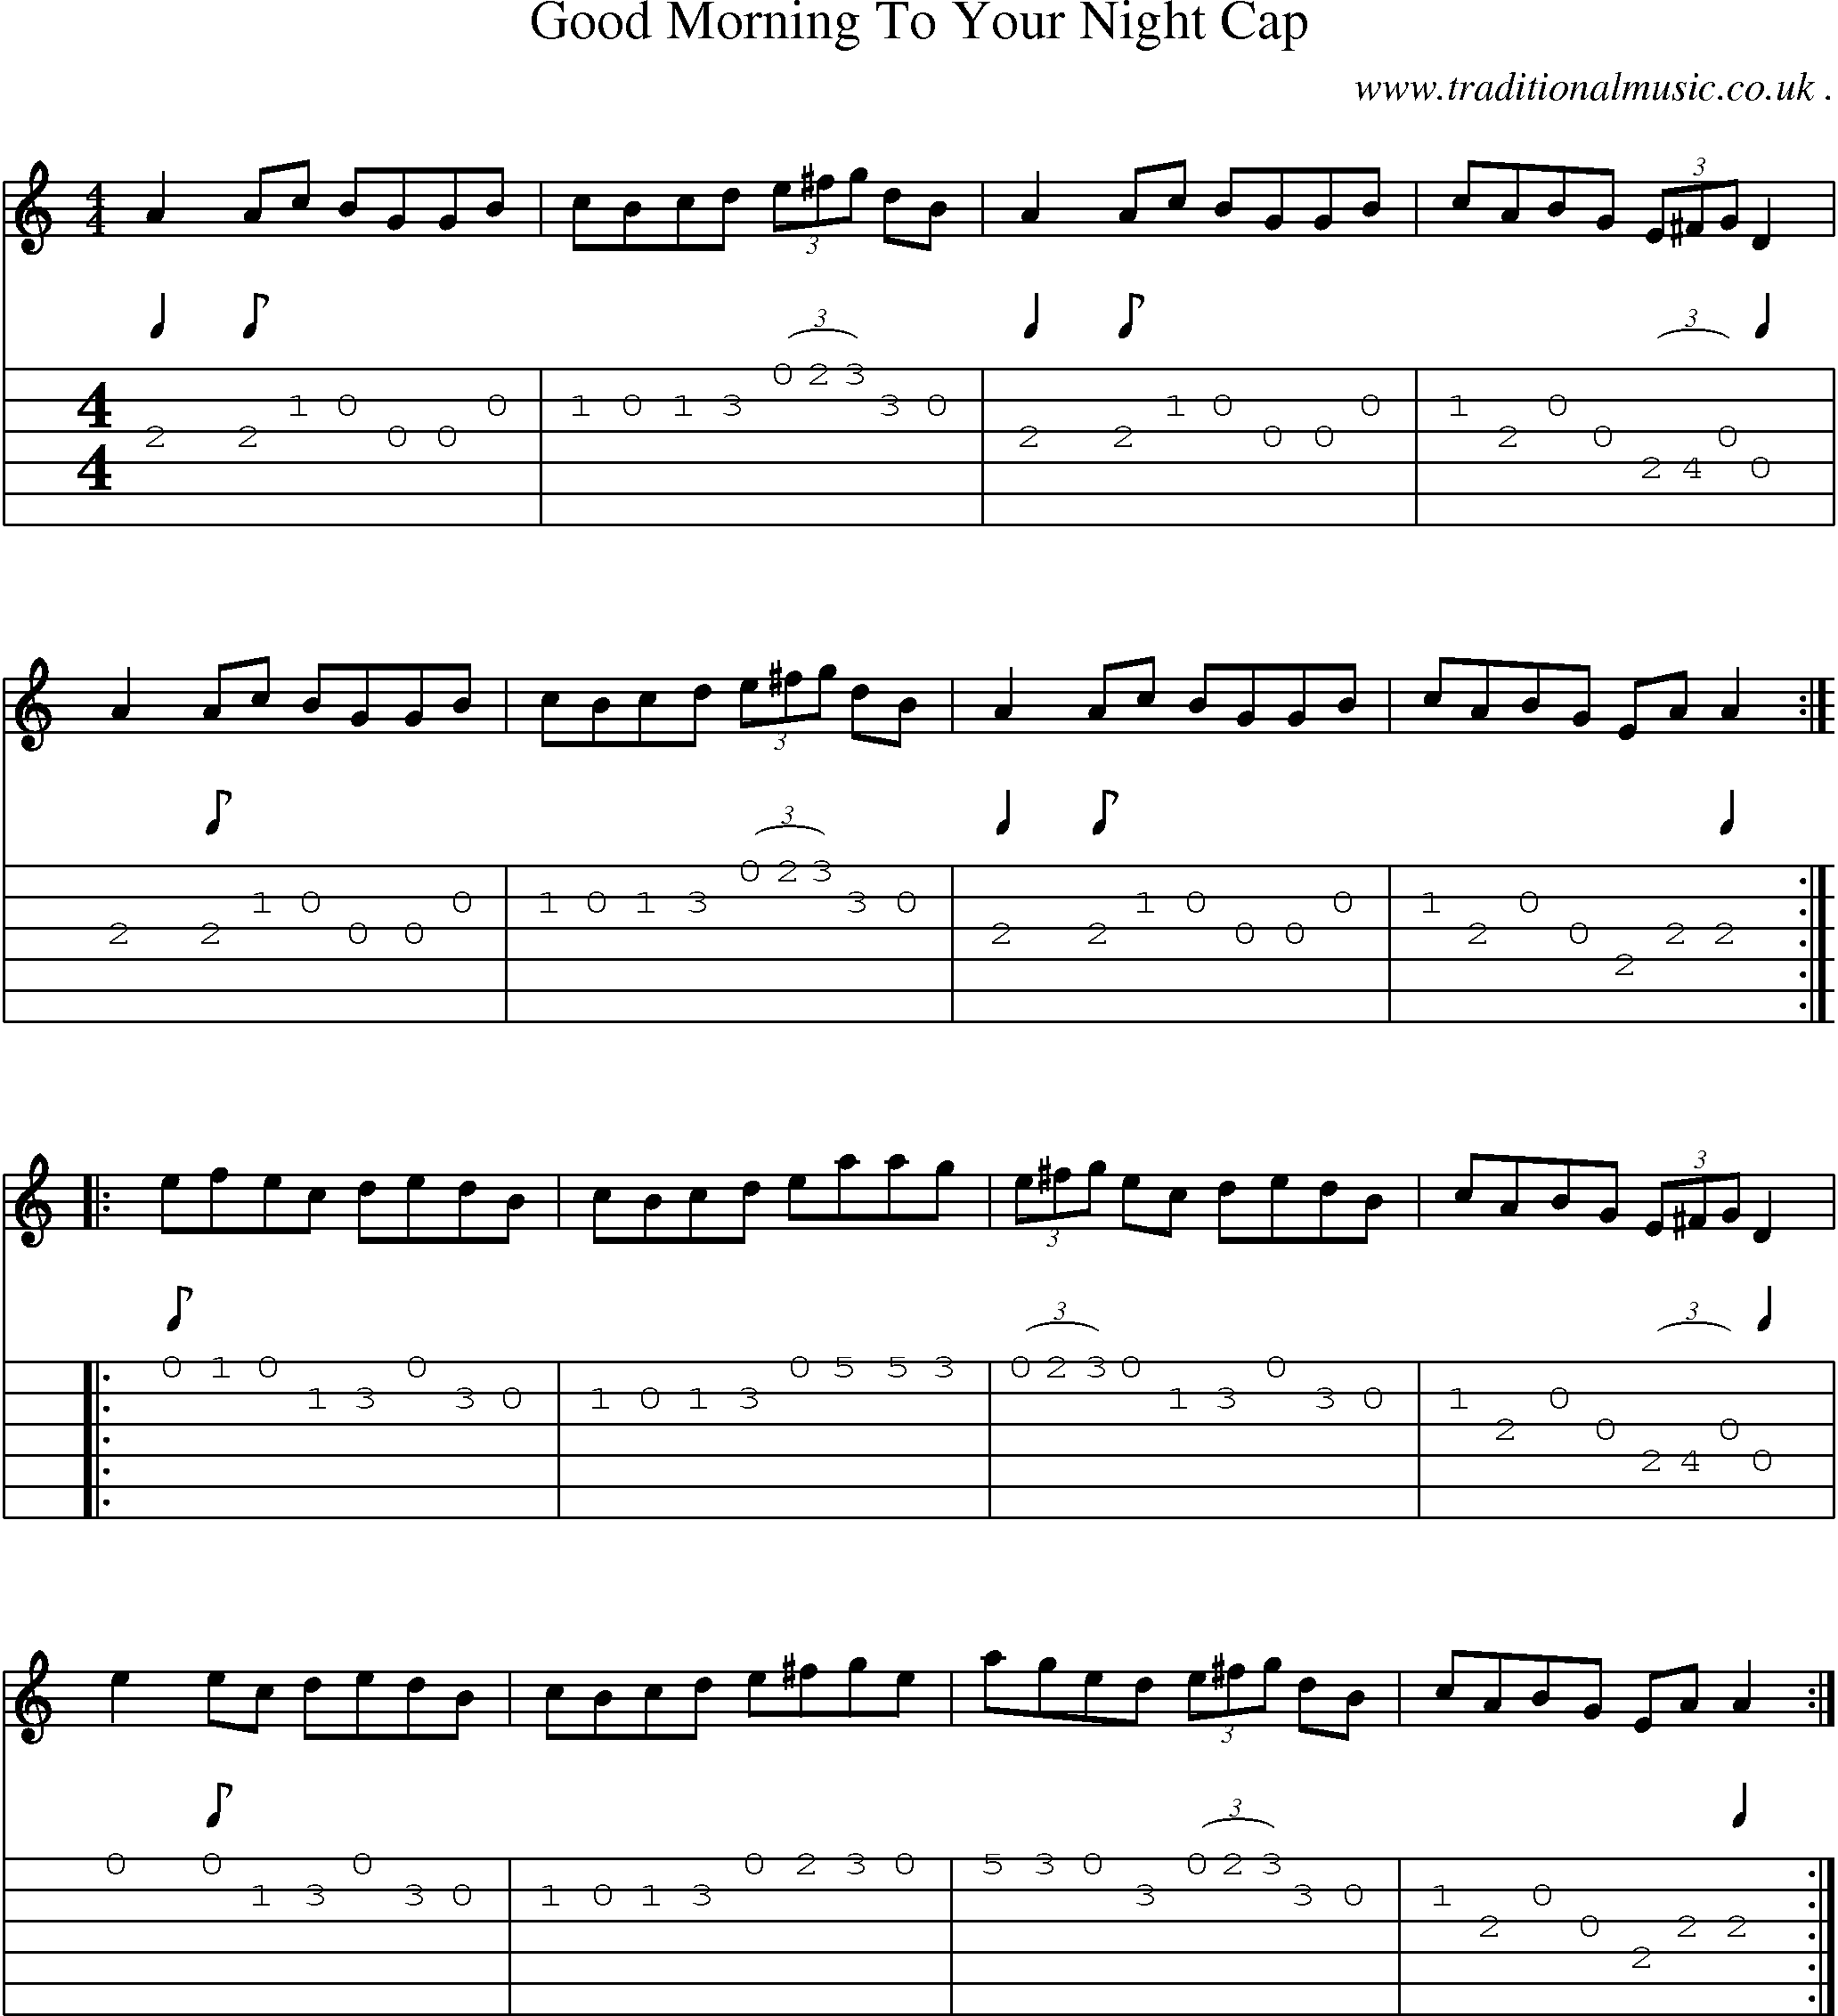 Sheet-Music and Guitar Tabs for Good Morning To Your Night Cap